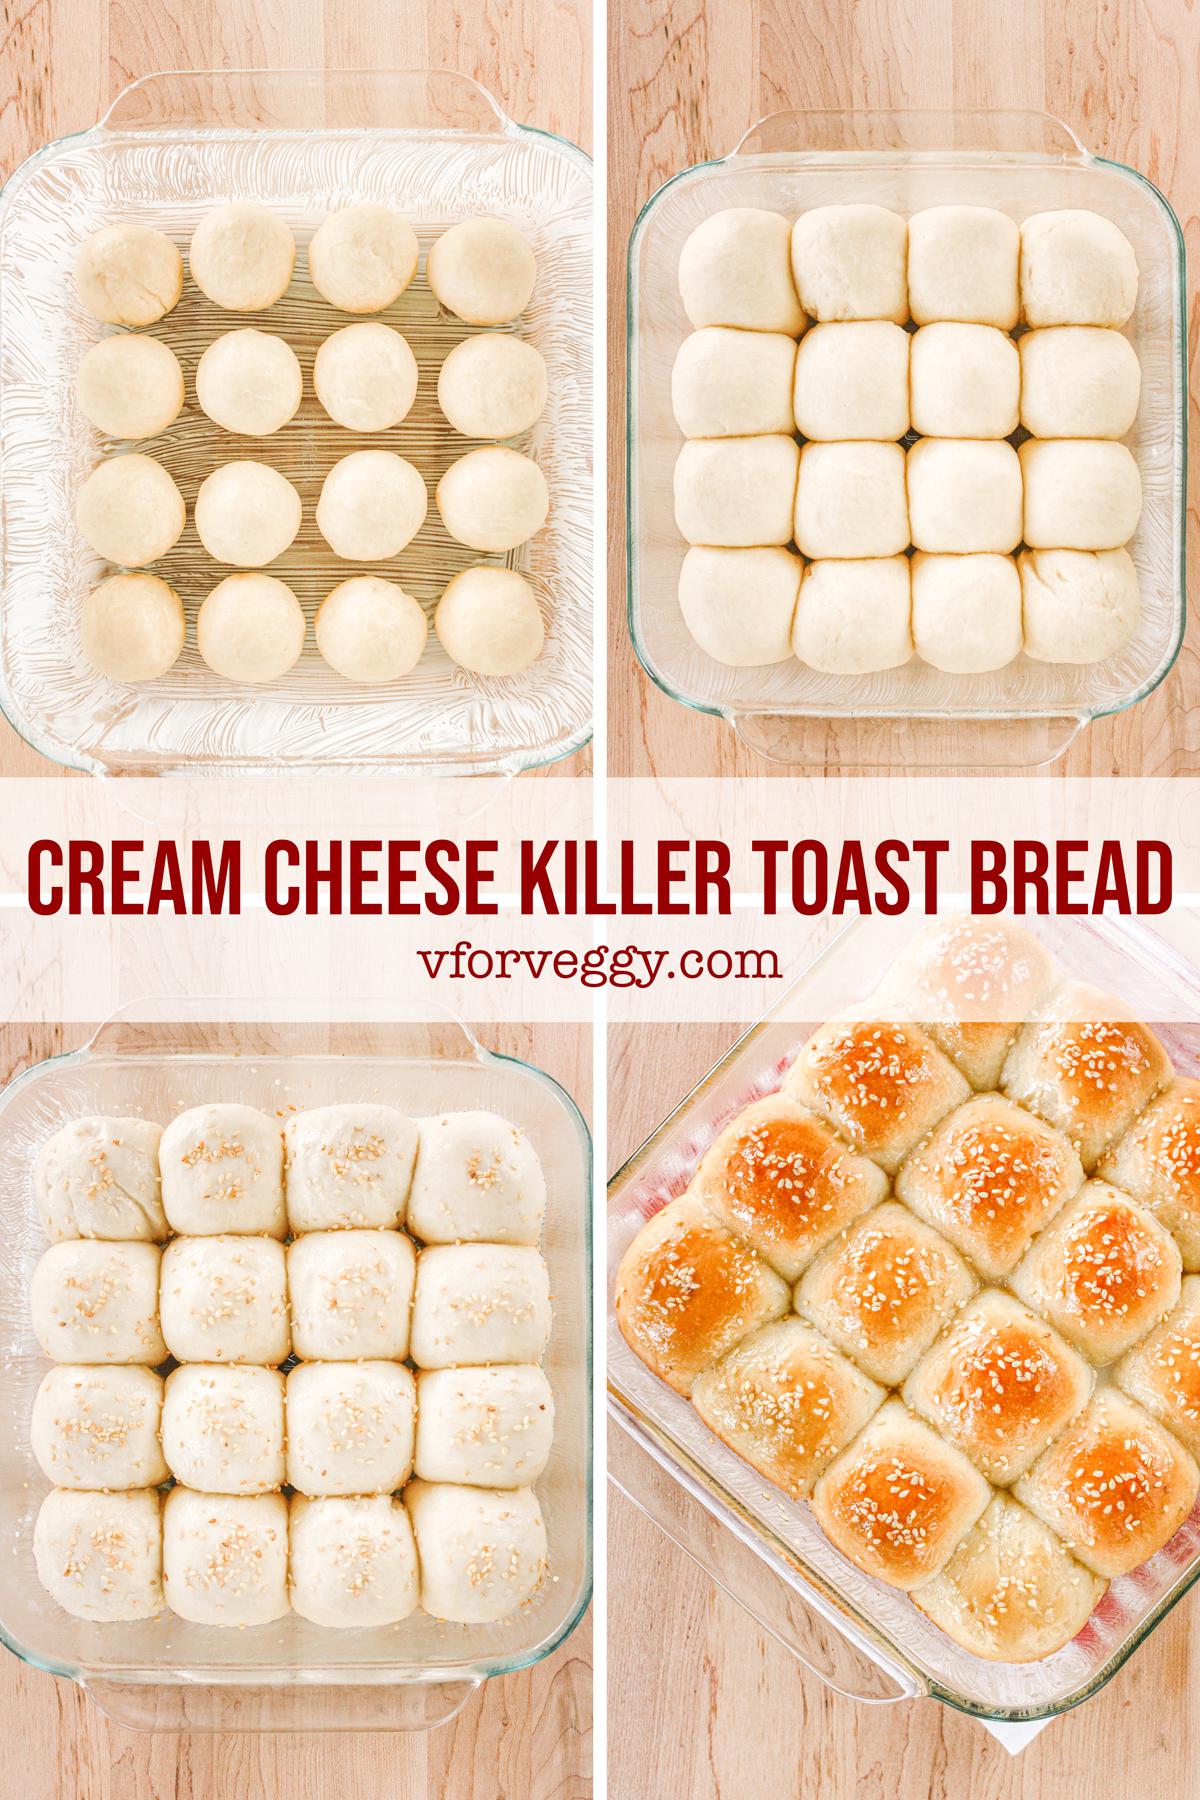 Step by step to make cream cheese killer toast bread.